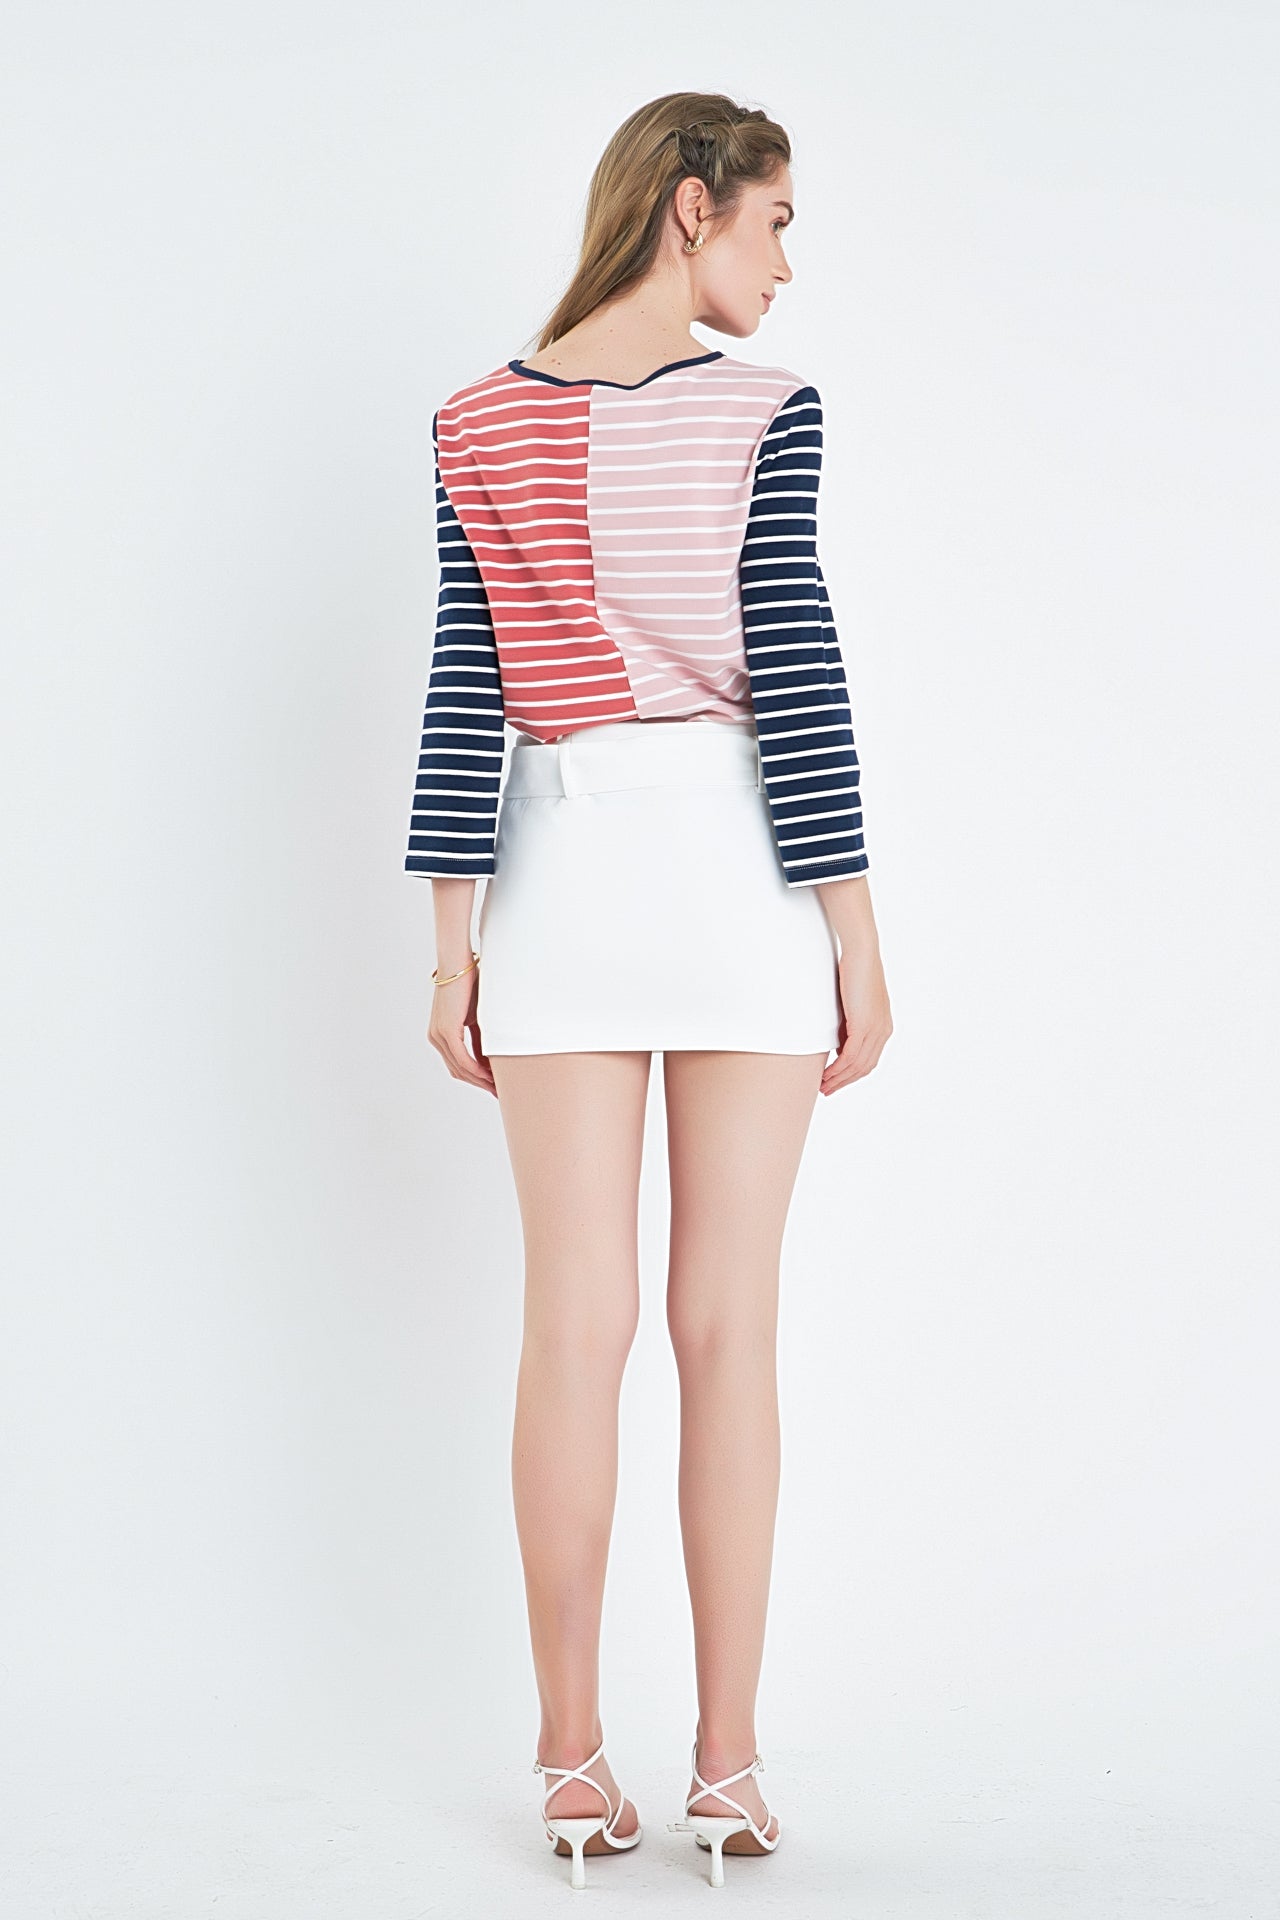 ENGLISH FACTORY - Striped Color Blocked 3/4 Length Sleeve Tee - TOPS available at Objectrare